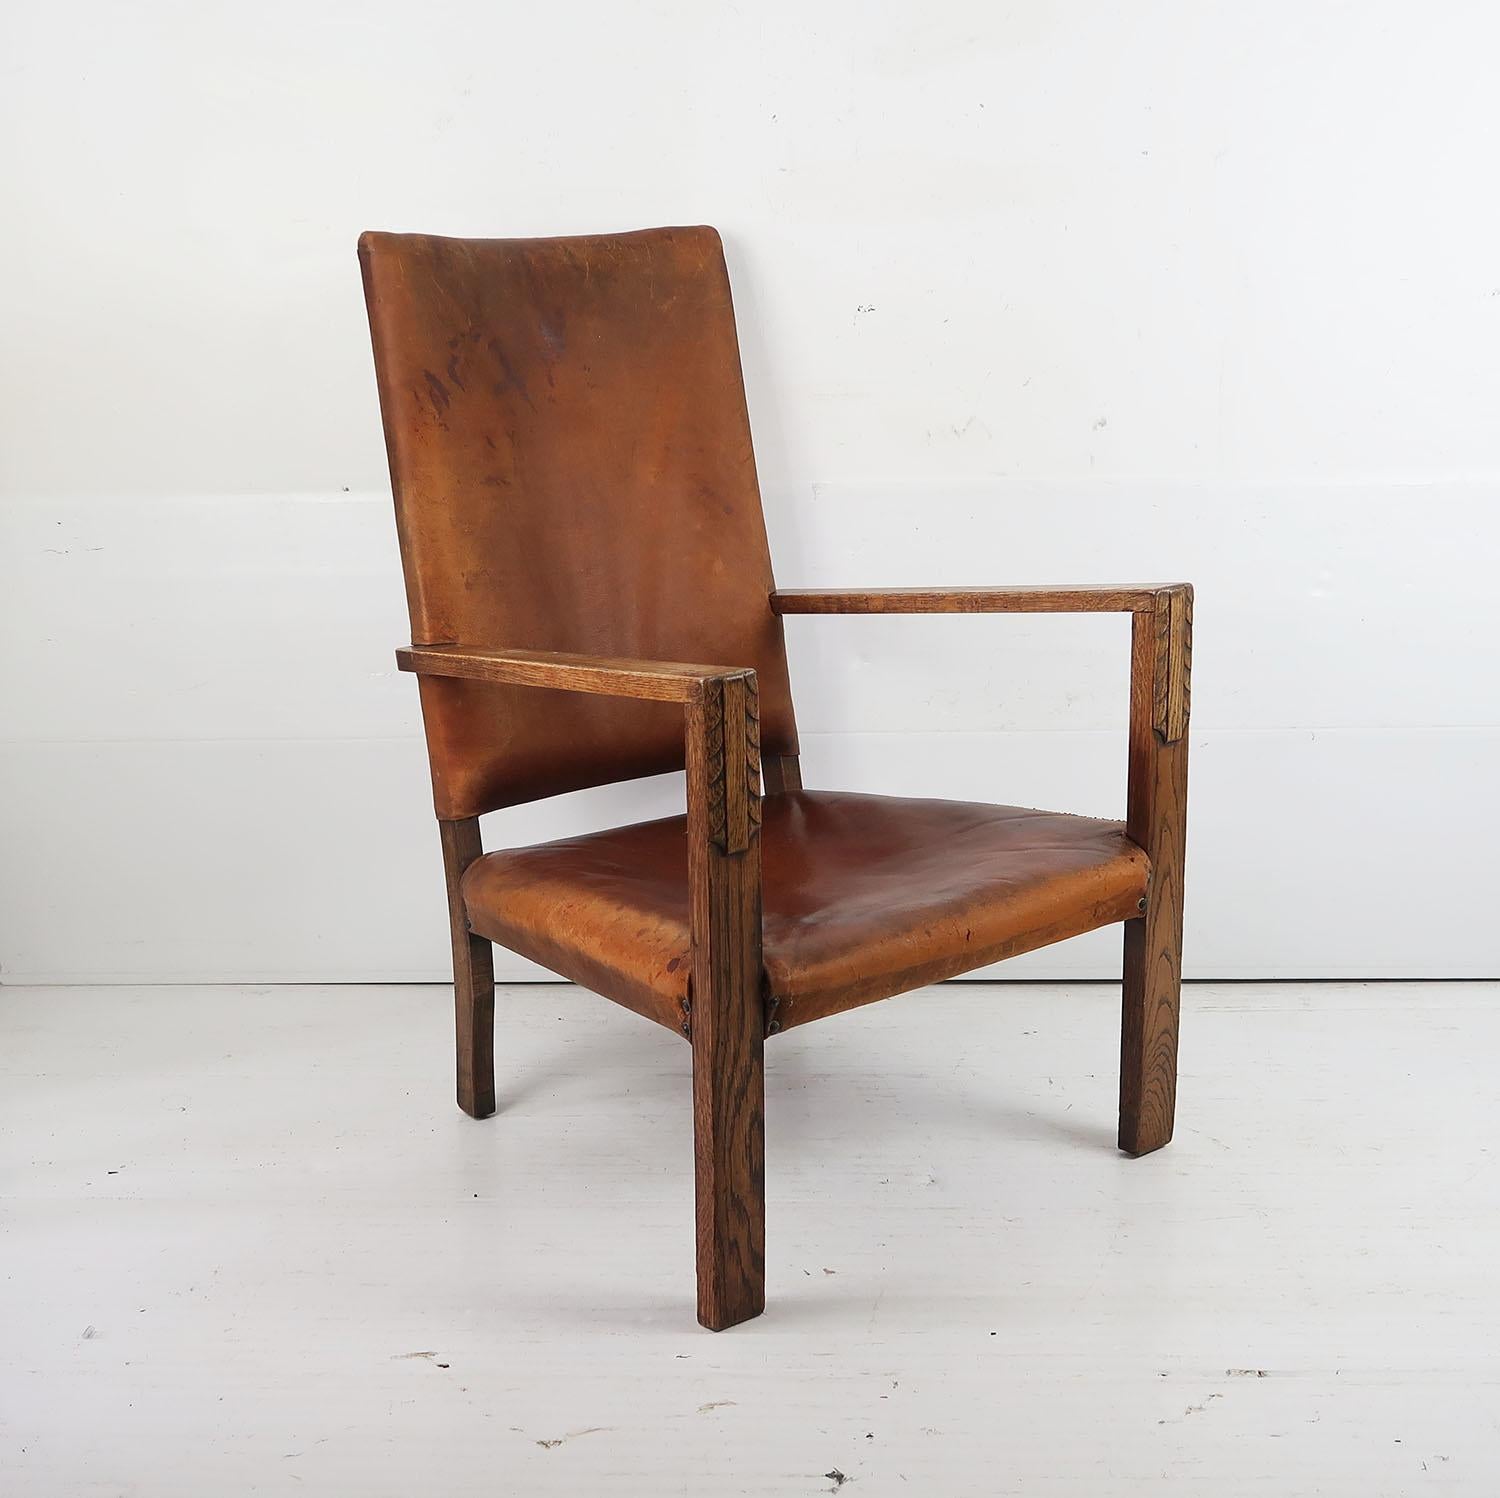 
Great leather chair

Cotswold School style

The style is transitional from Arts and Crafts to Art Deco

Original leather upholstery

Oak frame with a lovely carved understated detail on the arms

Designer unknown




